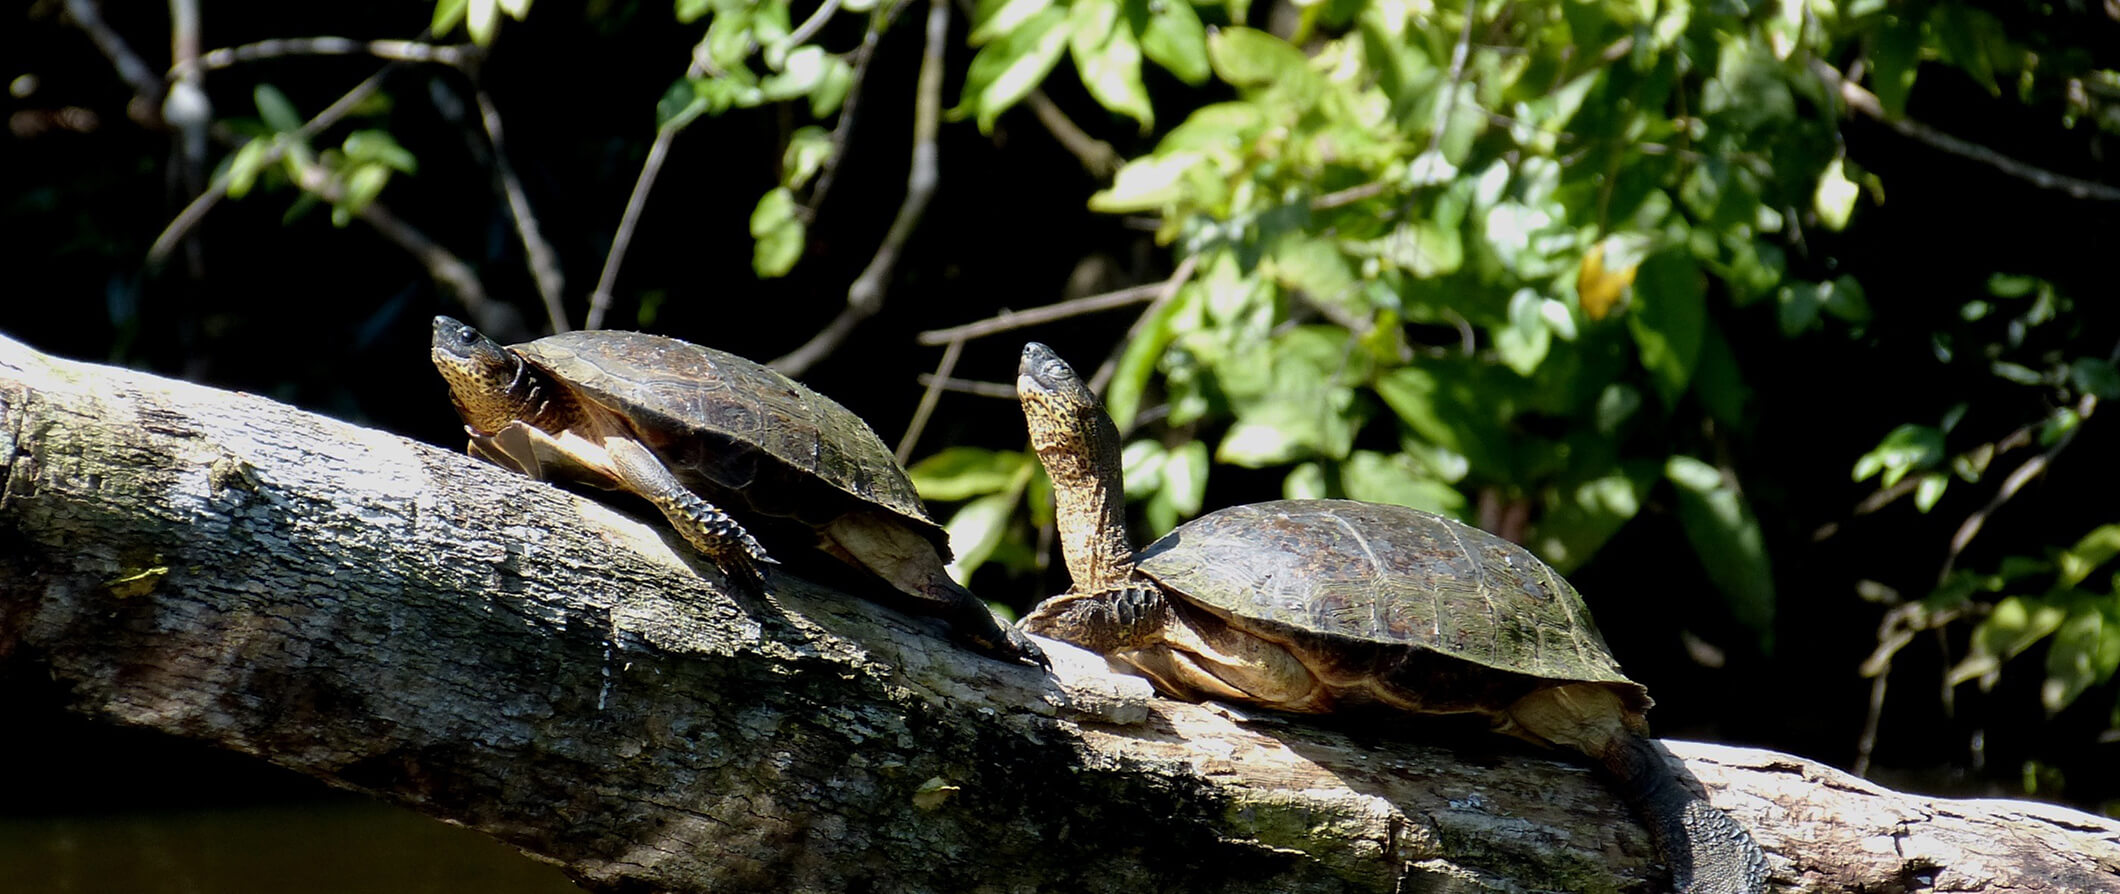 two tortoises on a tree branch